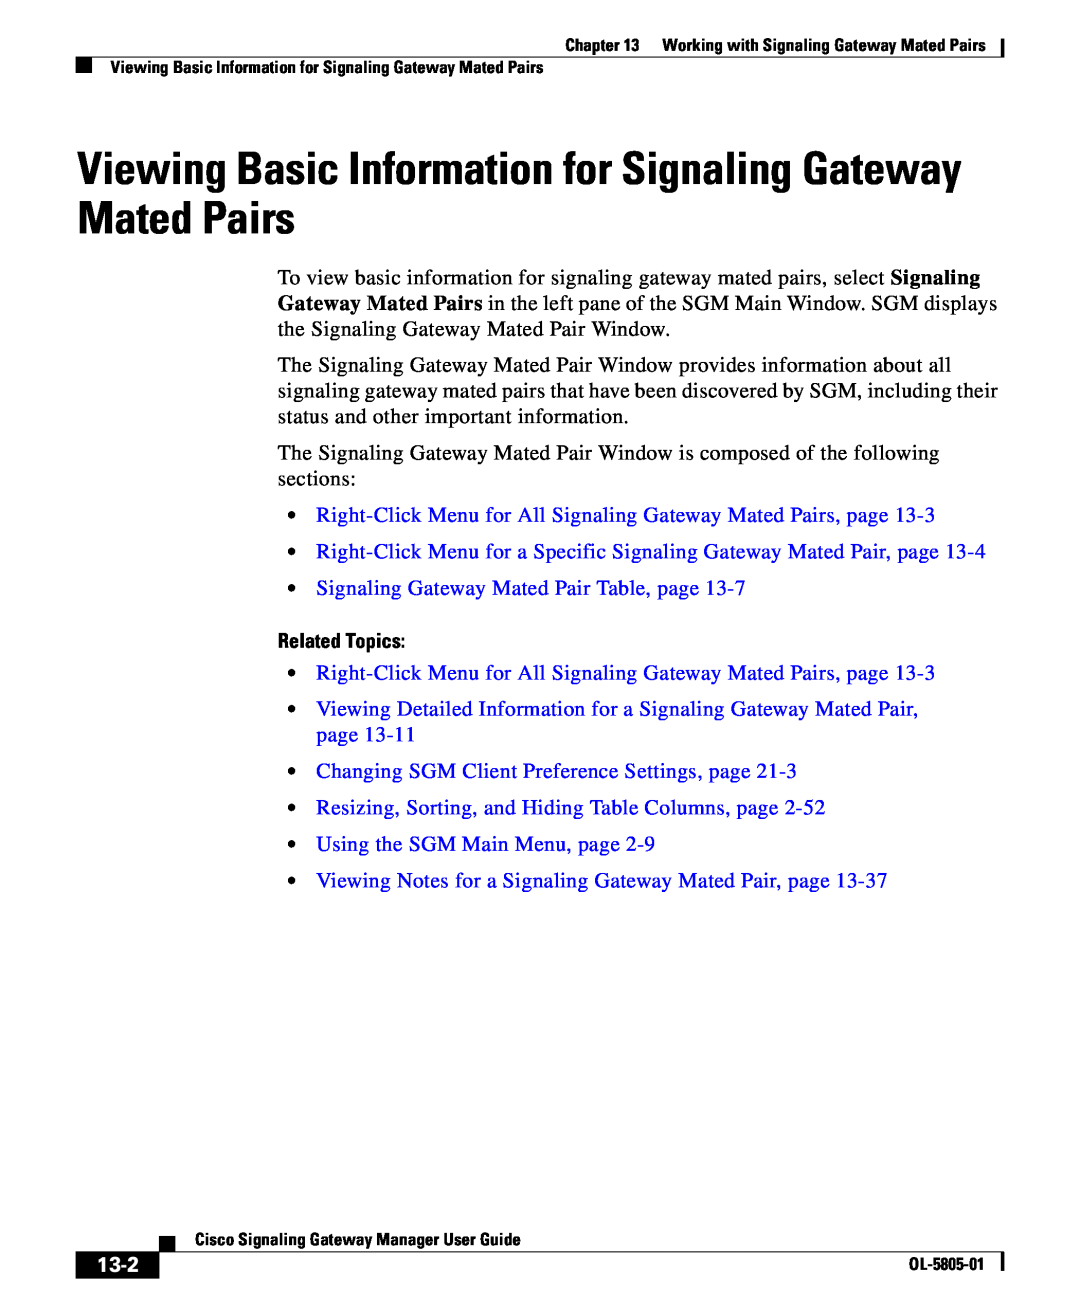 Cisco Systems OL-5805-01 Viewing Basic Information for Signaling Gateway Mated Pairs, Using the SGM Main Menu, page, 13-2 